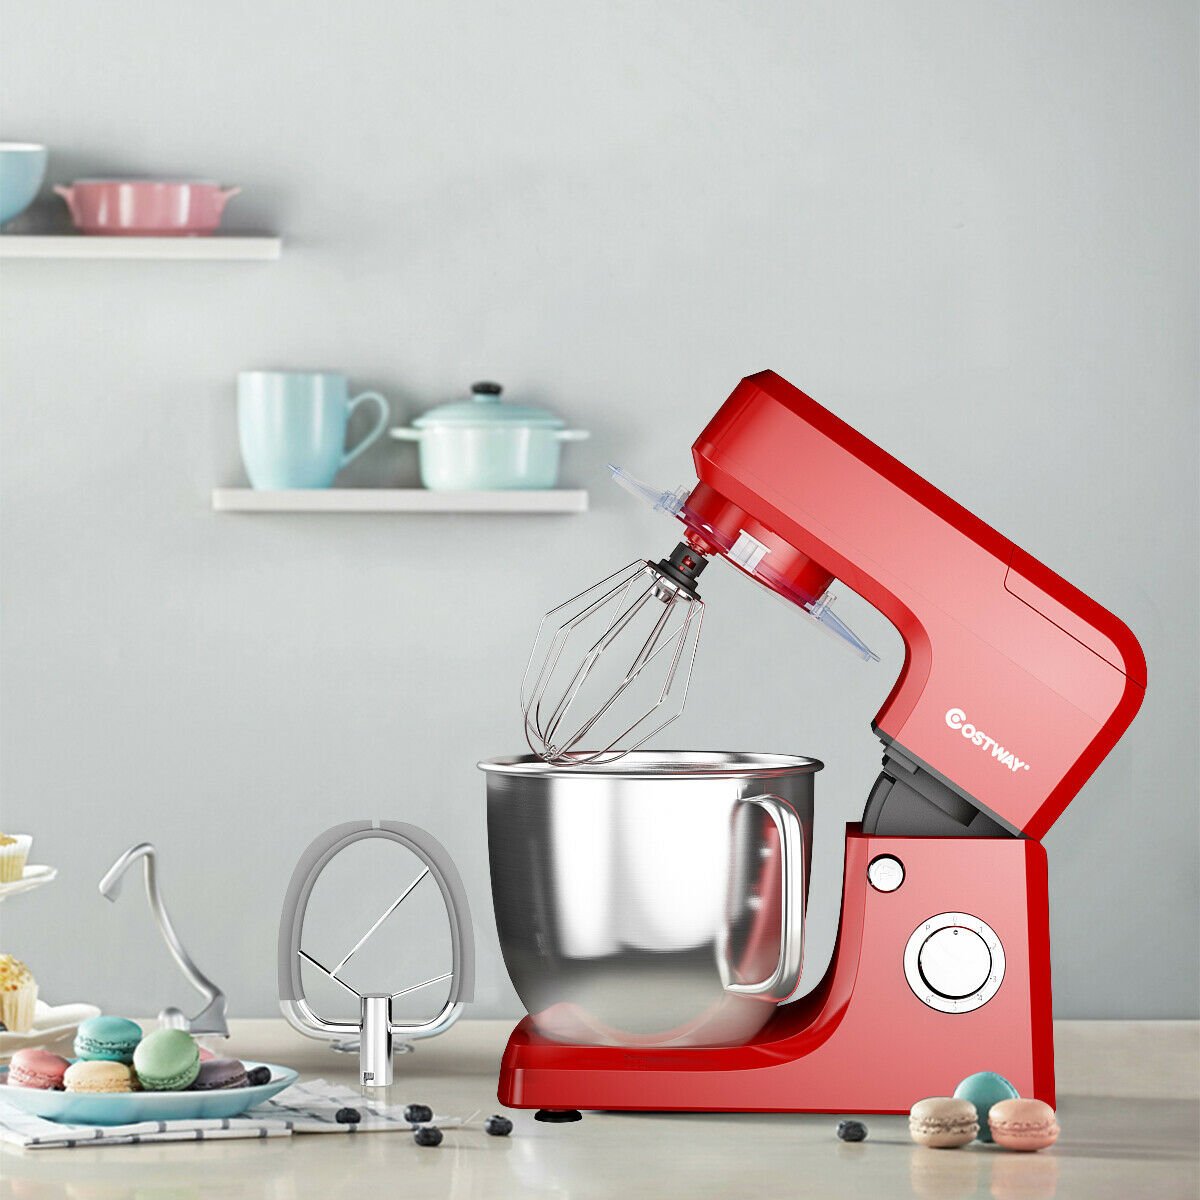 3-in-1 Multi-functional 6-speed Tilt-head Food Stand Mixer, Red at Gallery Canada